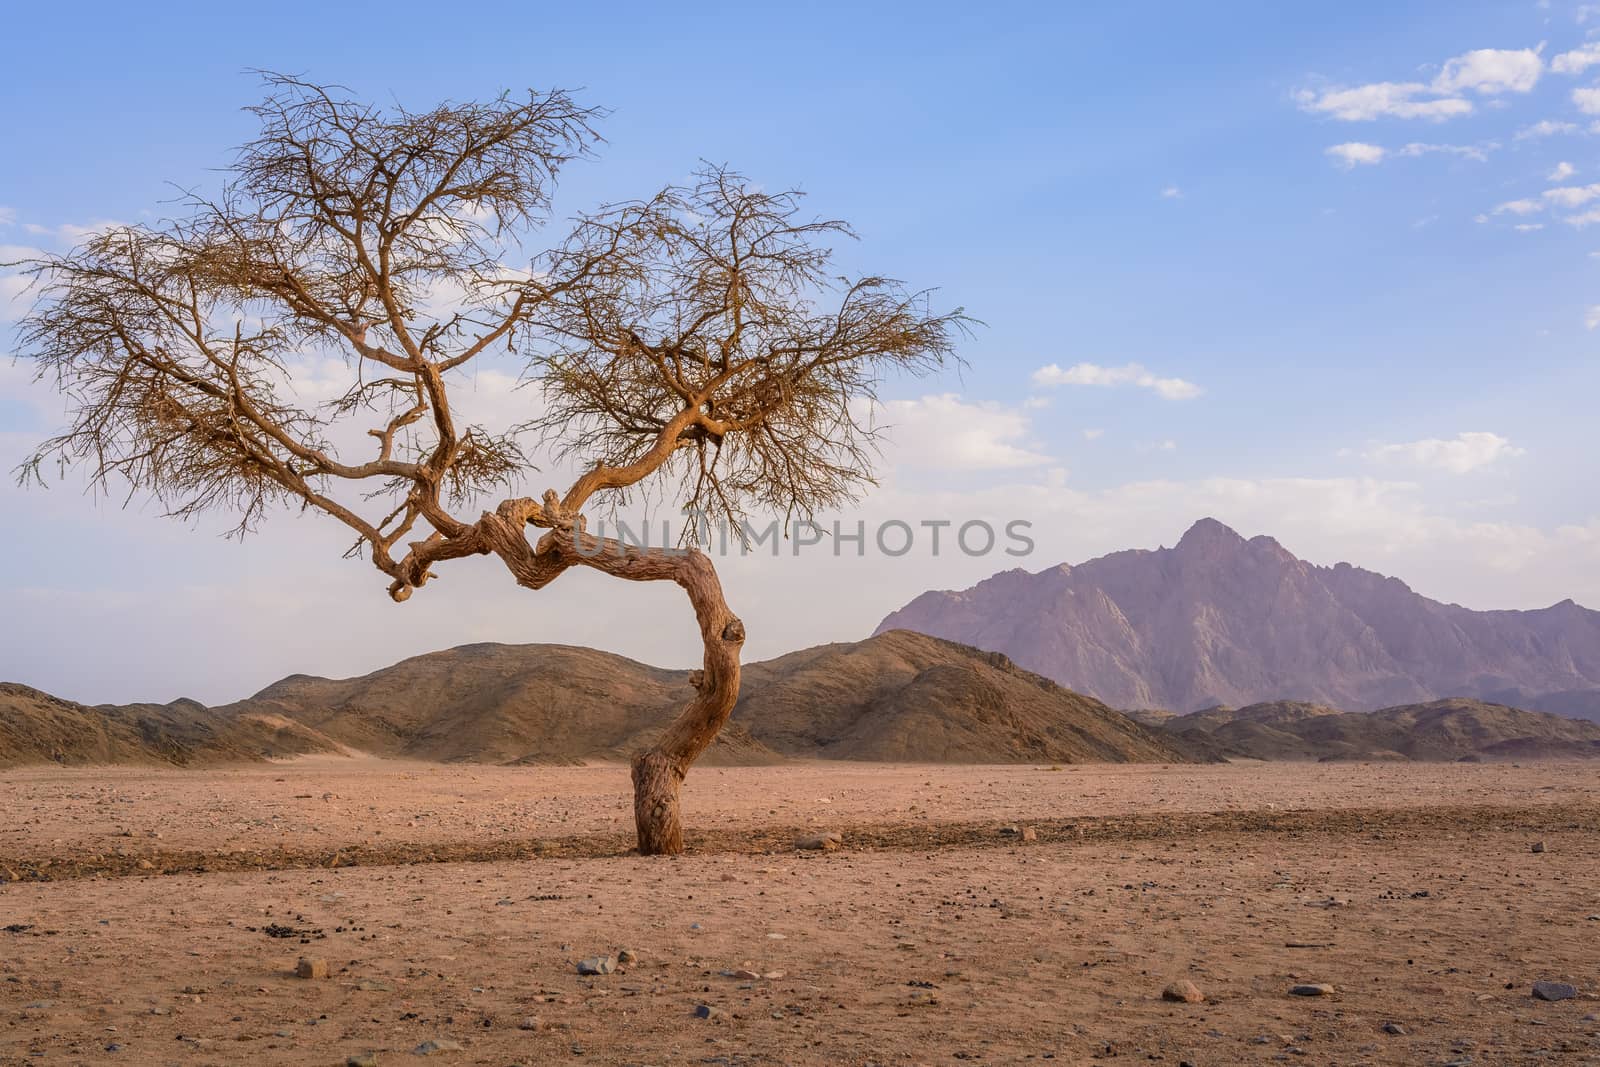 In the picture a valley in the desert with an Acacia tree with mountain rock and clouds in the background.